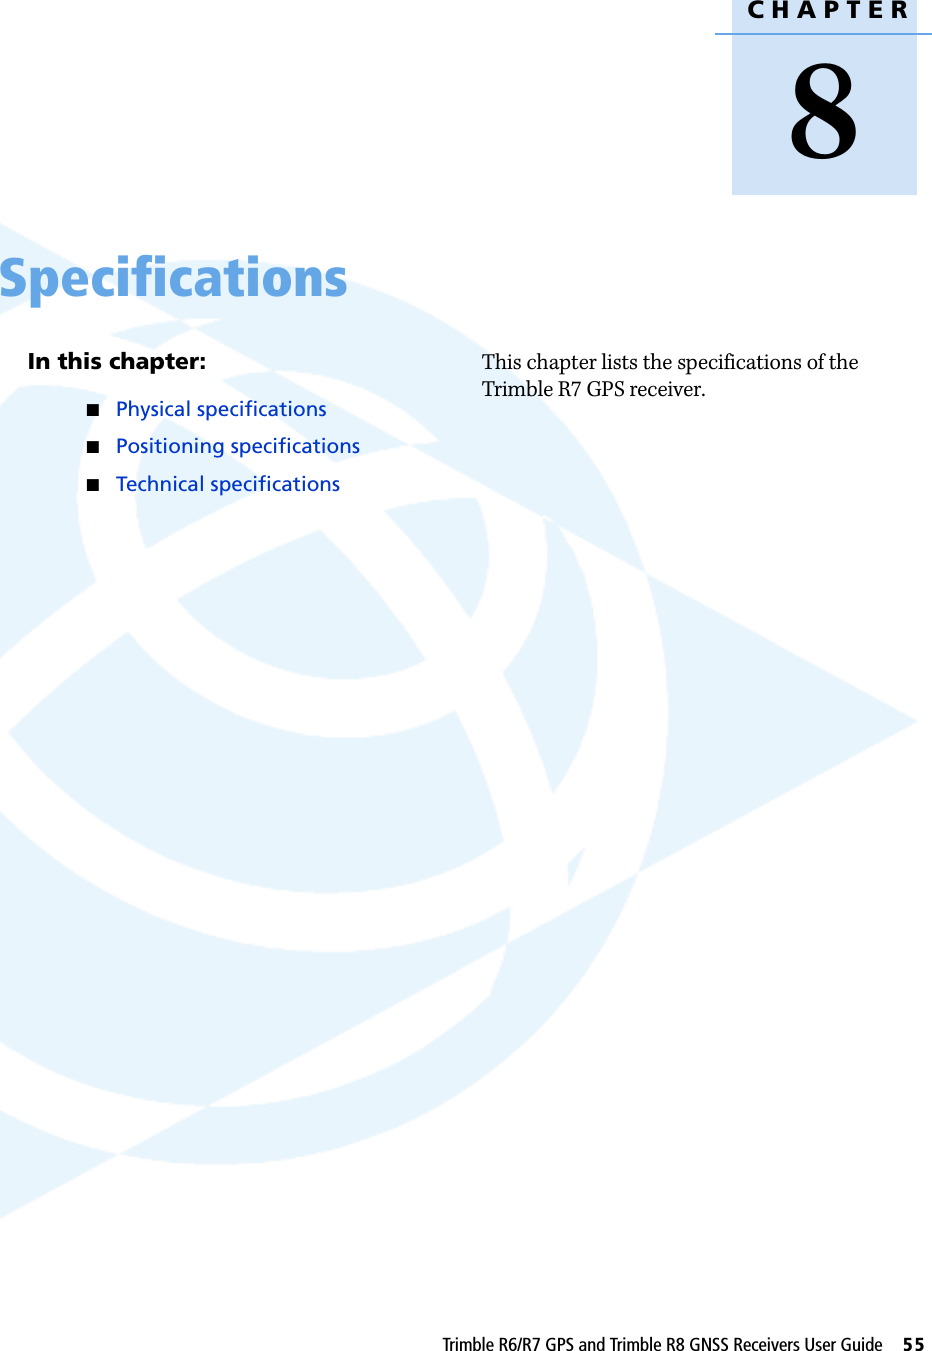 CHAPTER8Trimble R6/R7 GPS and Trimble R8 GNSS Receivers User Guide     55Specifications 8In this chapter:QPhysical specificationsQPositioning specificationsQTechnical specificationsThis chapter lists the specifications of the Trimble R7 GPS receiver.